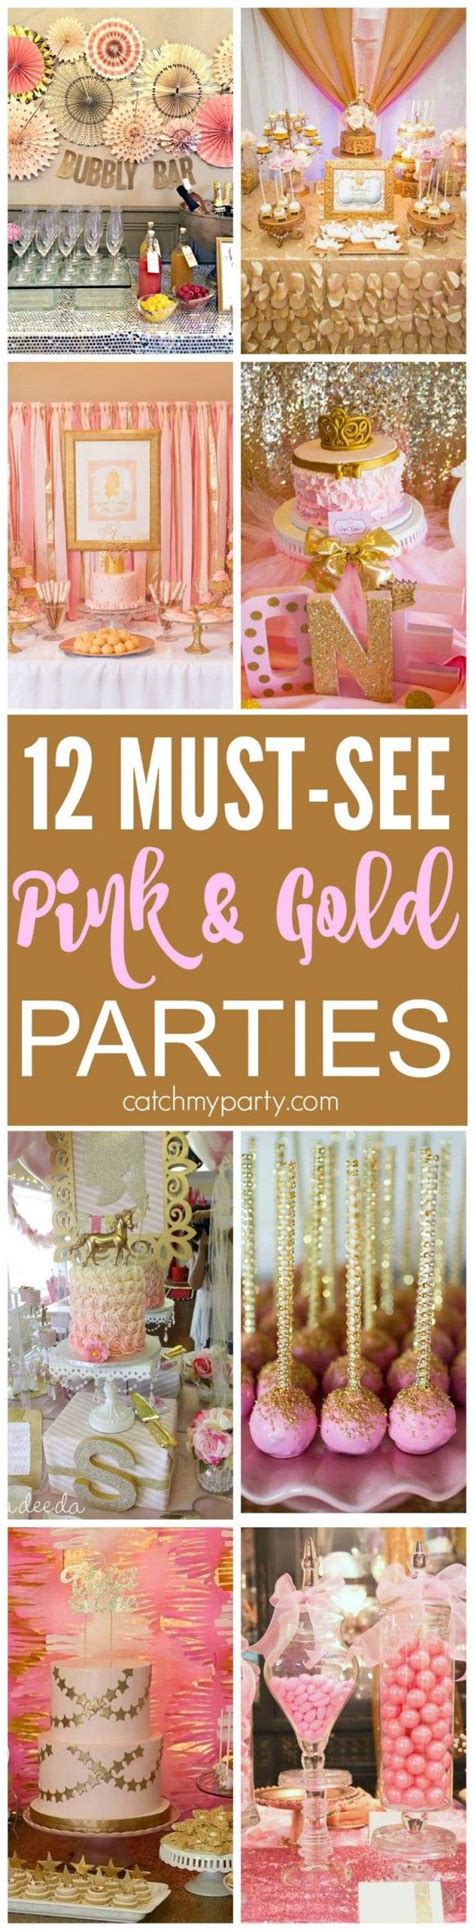 12 Must See Pink And Gold Birthday Parties There Are Ideas For Bridal